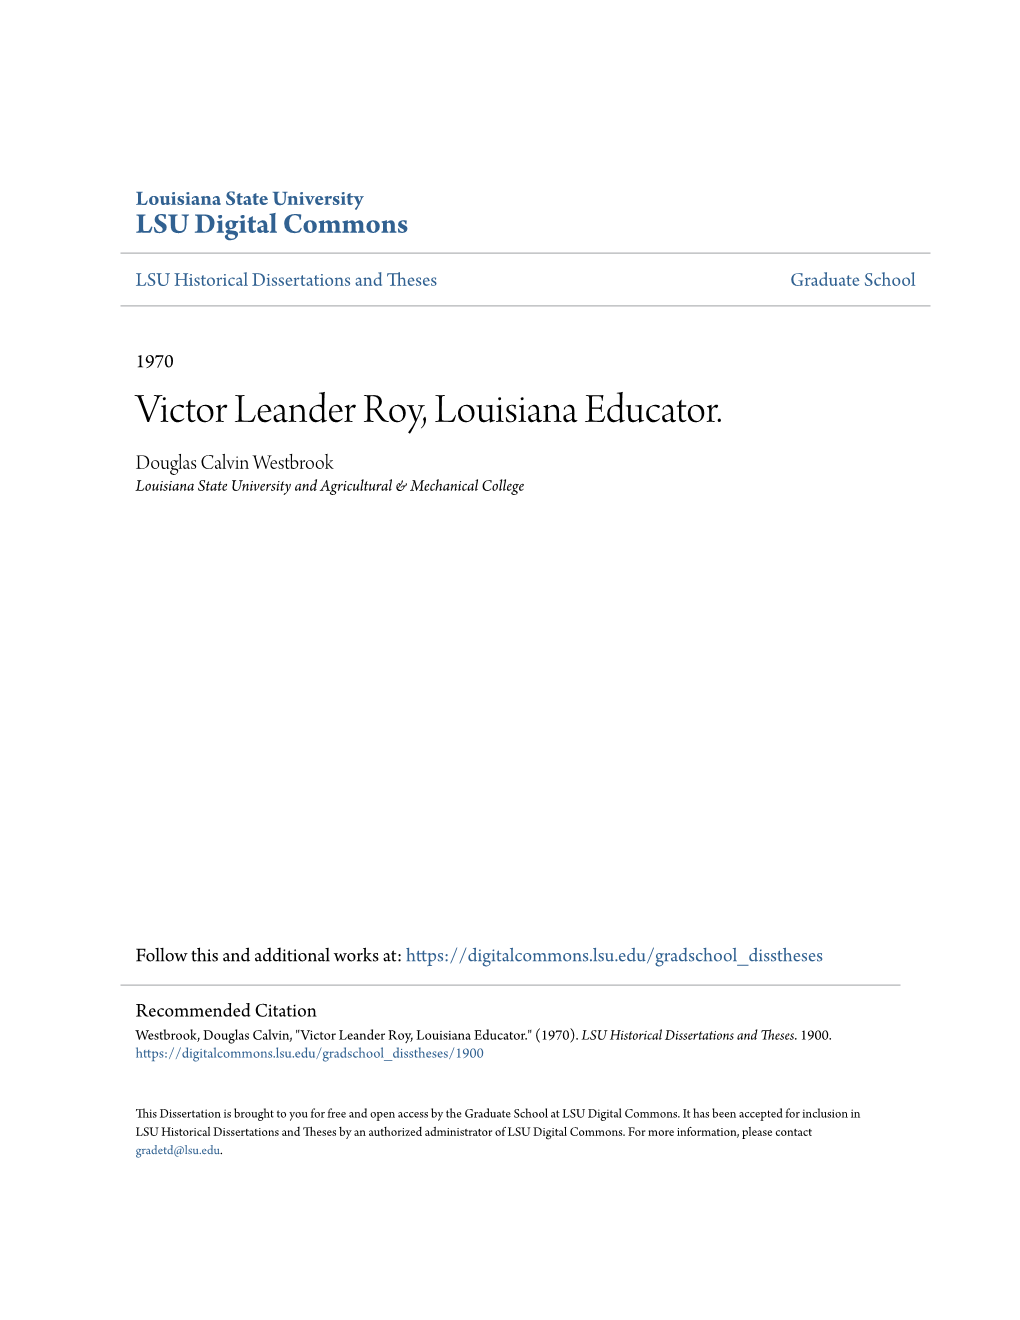 Victor Leander Roy, Louisiana Educator. Douglas Calvin Westbrook Louisiana State University and Agricultural & Mechanical College